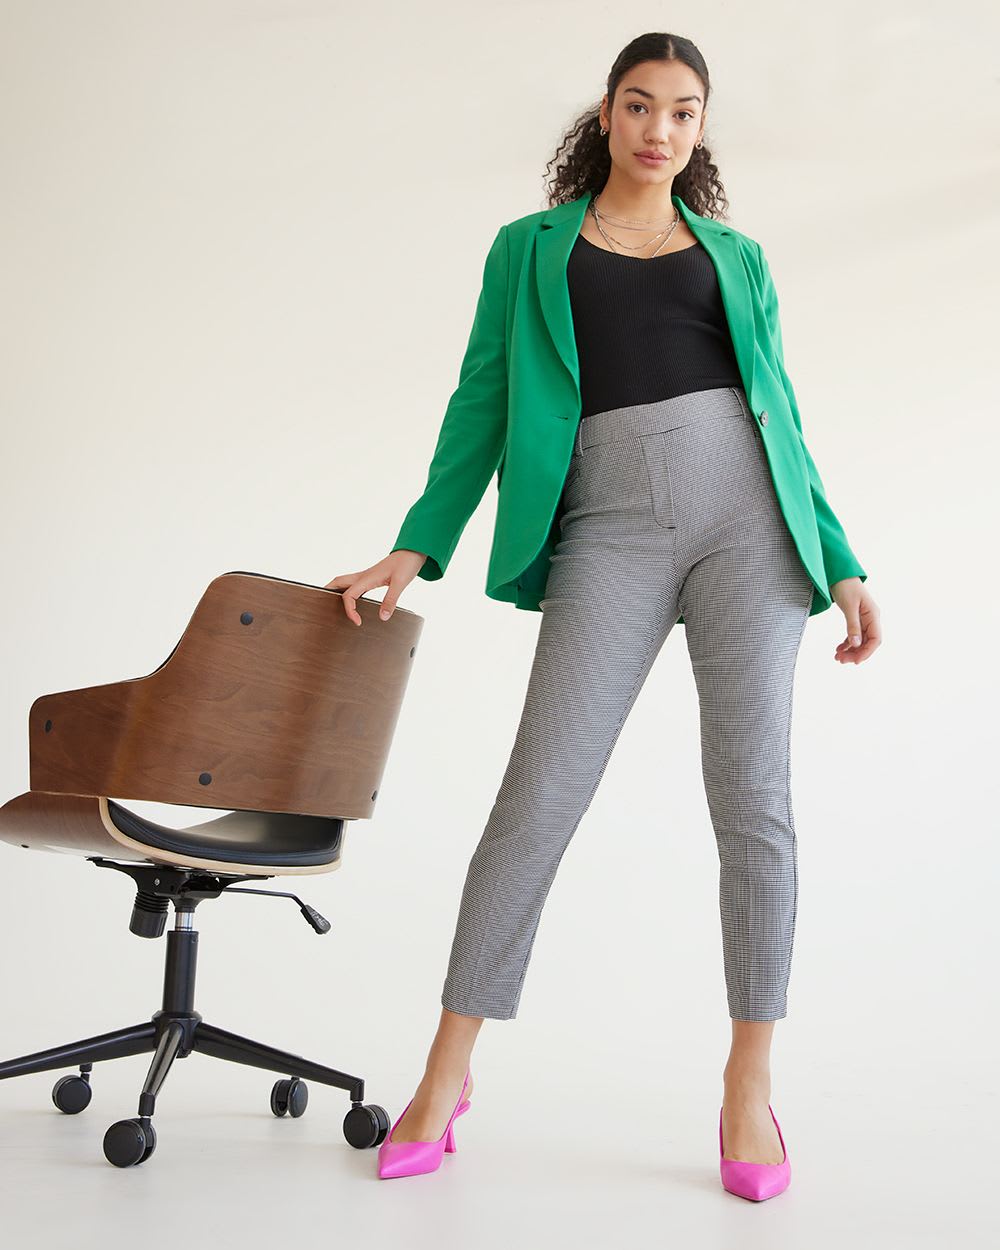 Slim-Leg High-Rise Ankle Pants, The Iconic - Tall